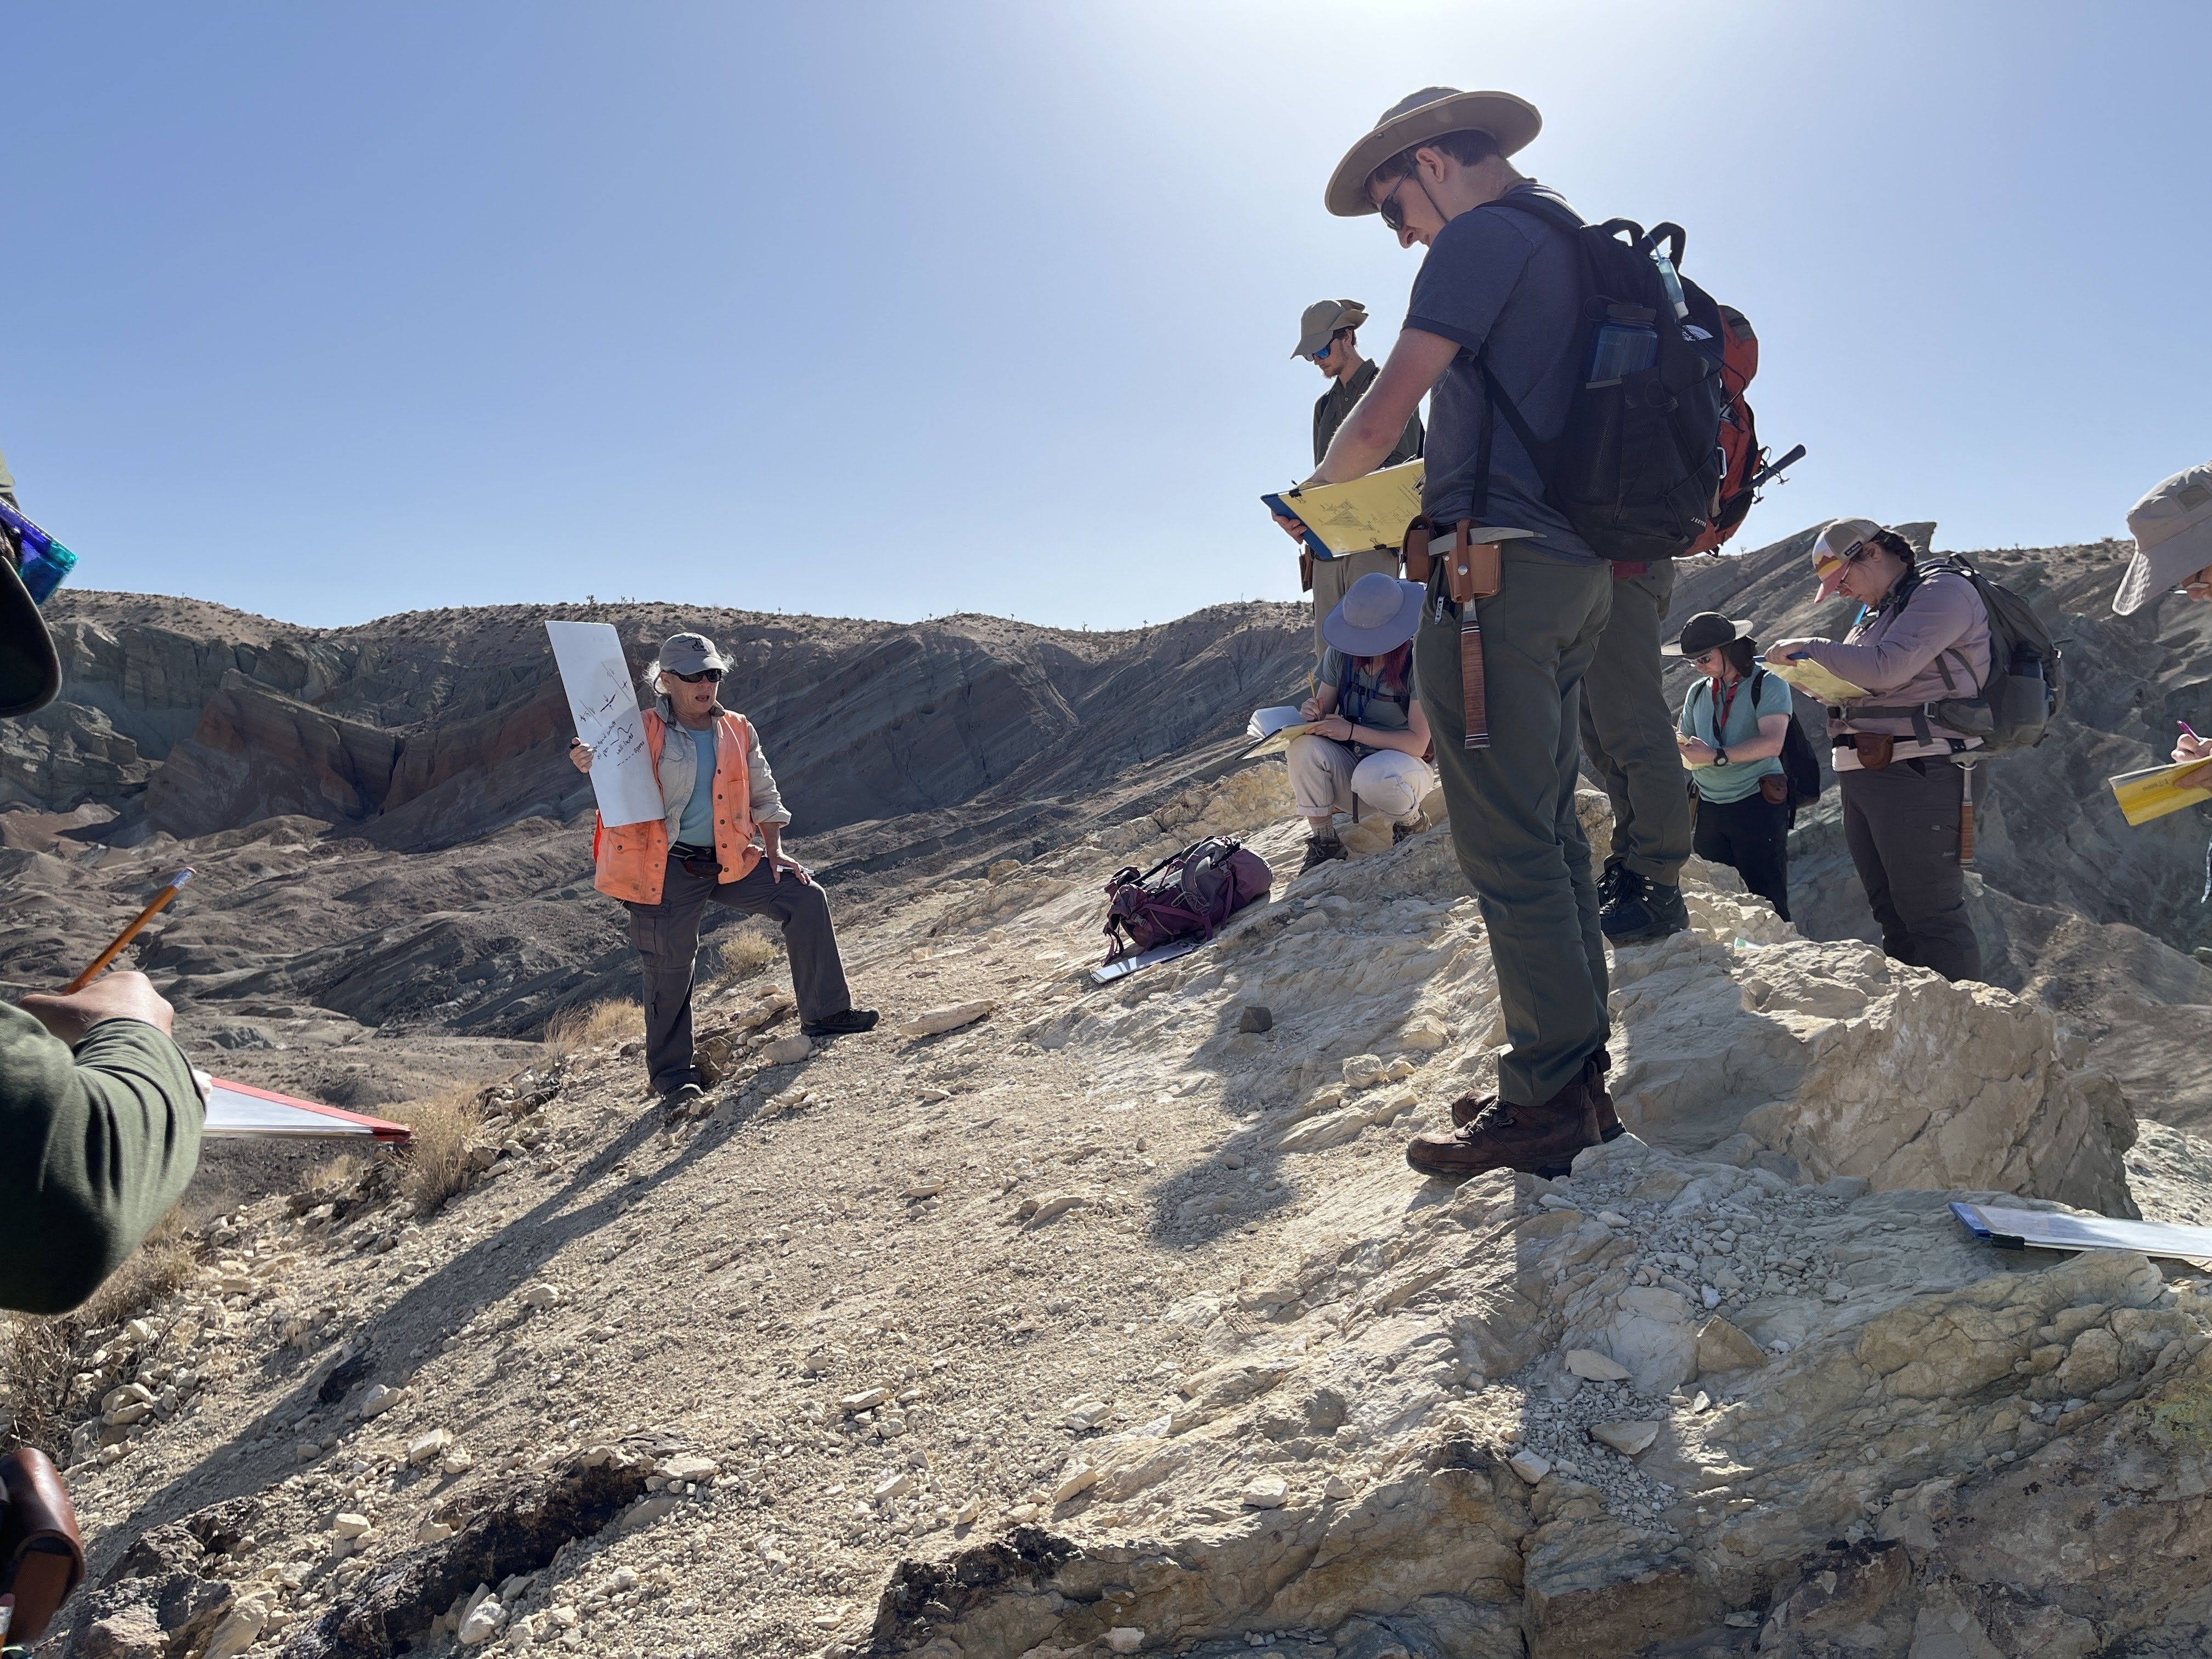 Geology Professor Liz Schermer holds a white board as she lectures on a rocky slope, surrounded by students 